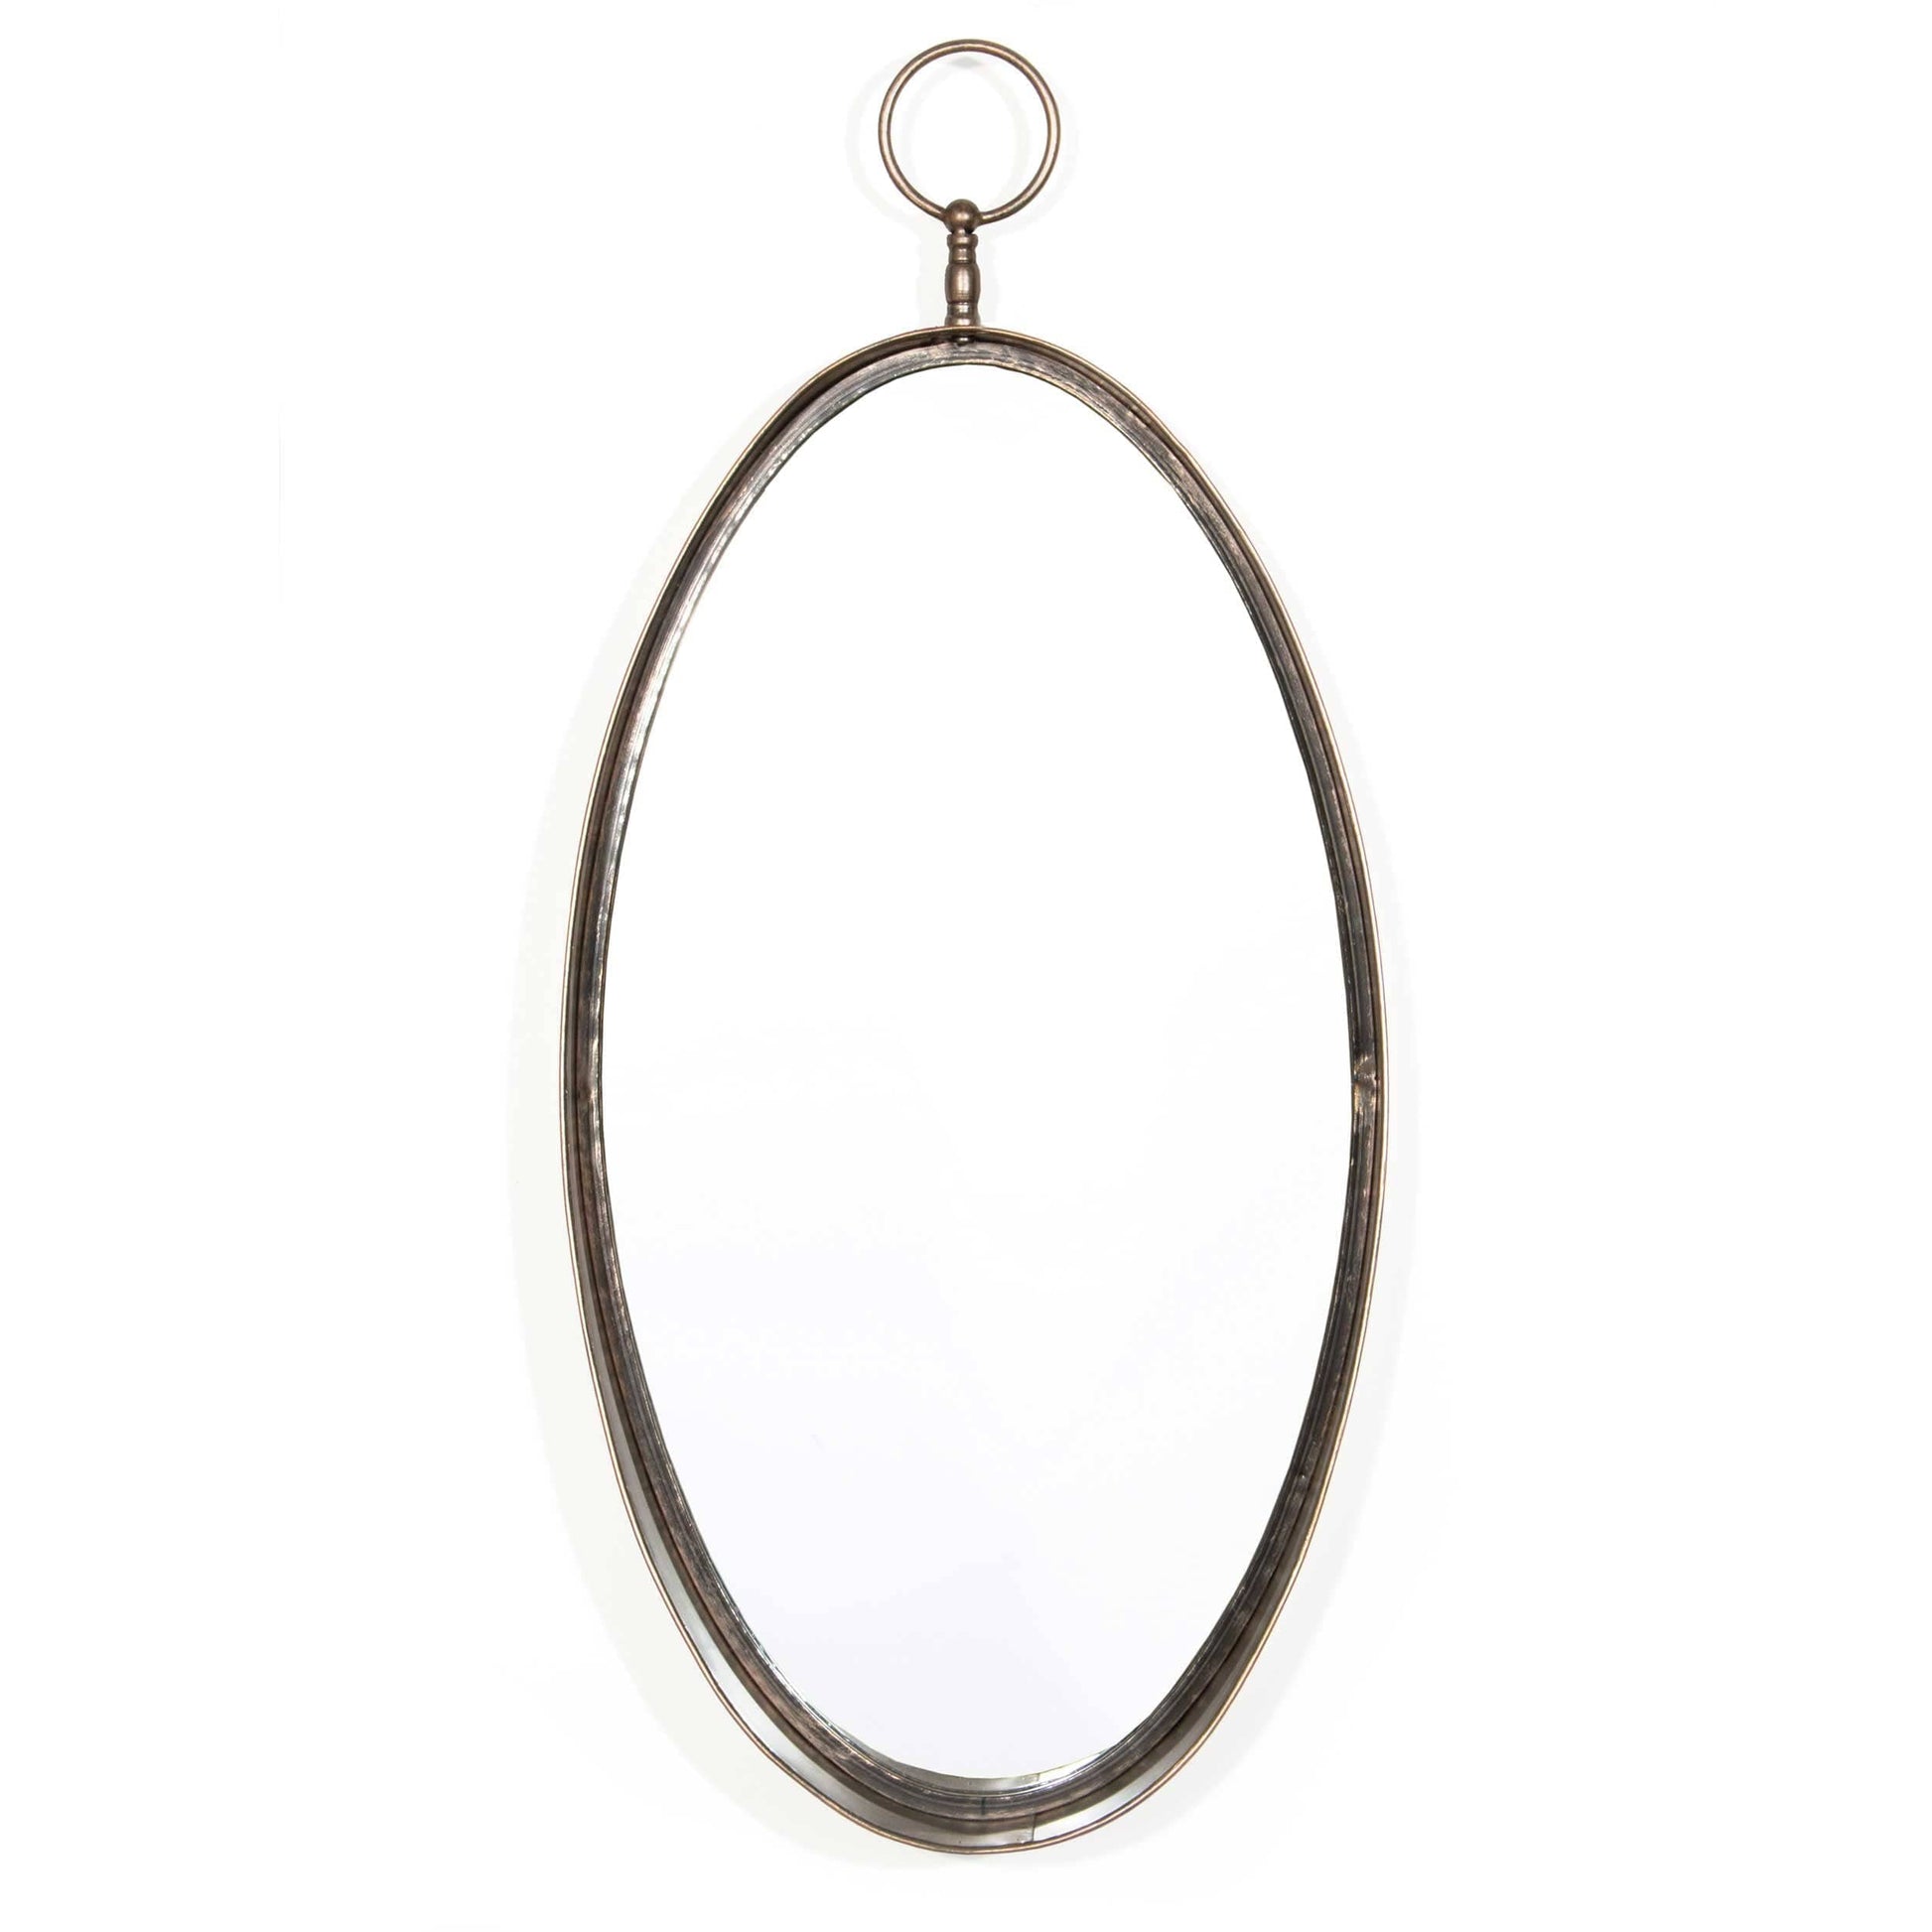 Macklin vertical oval-shaped mirror featuring a slender, distressed bronze frame, topped with a hanging loop.